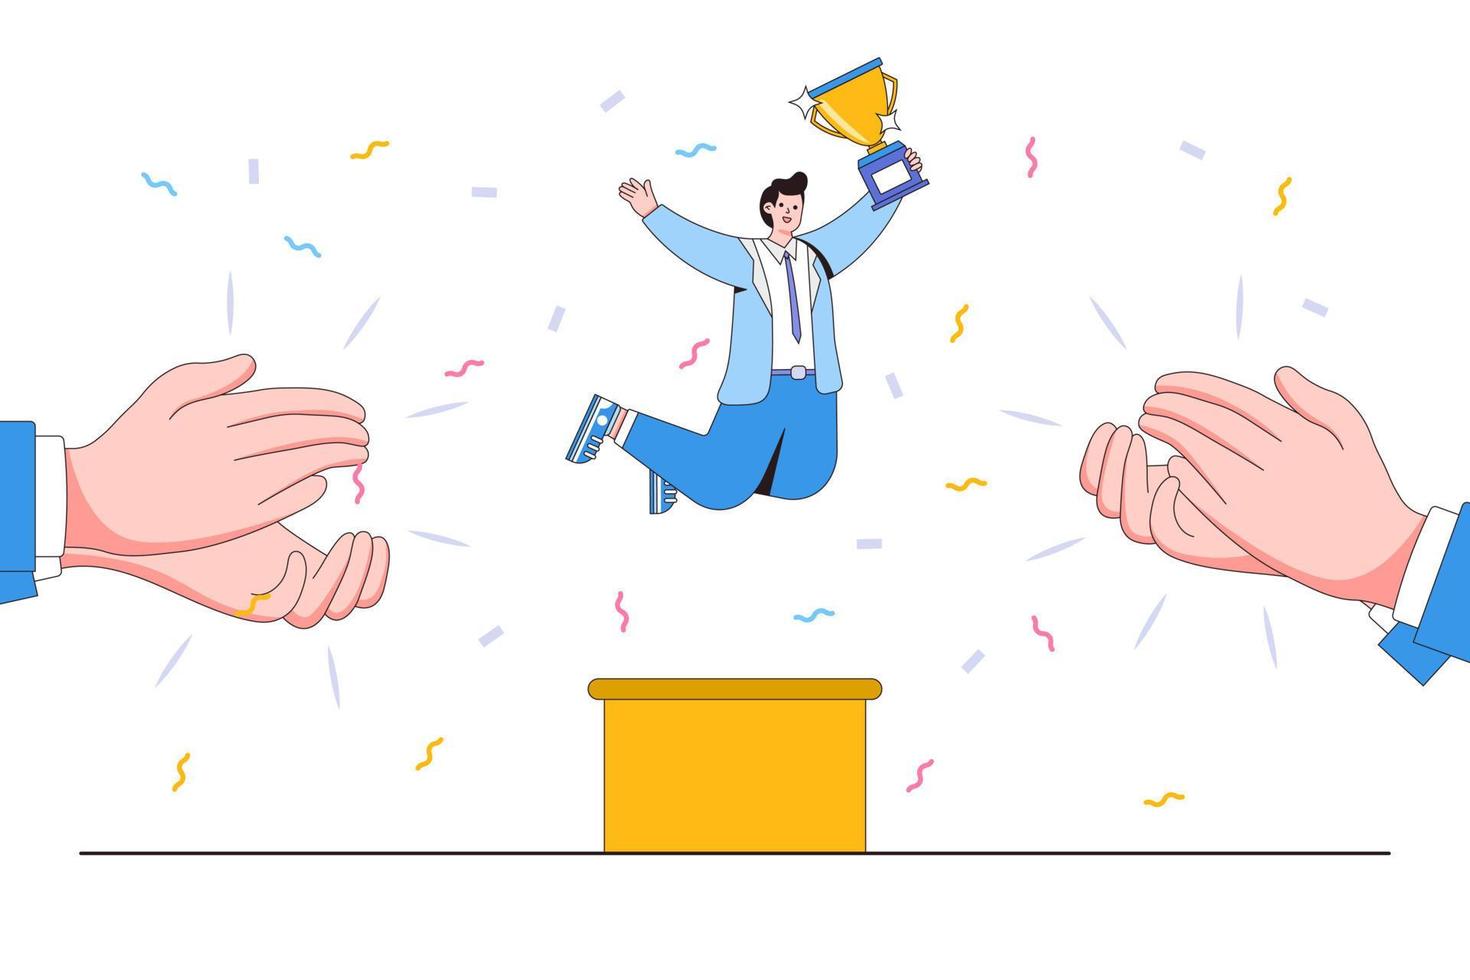 Celebrate work achievement, reaching goal or target, winning challenge or competition, success or victory concepts. Joyful businessman jumping holding award trophy with businesspeople hands clapping vector